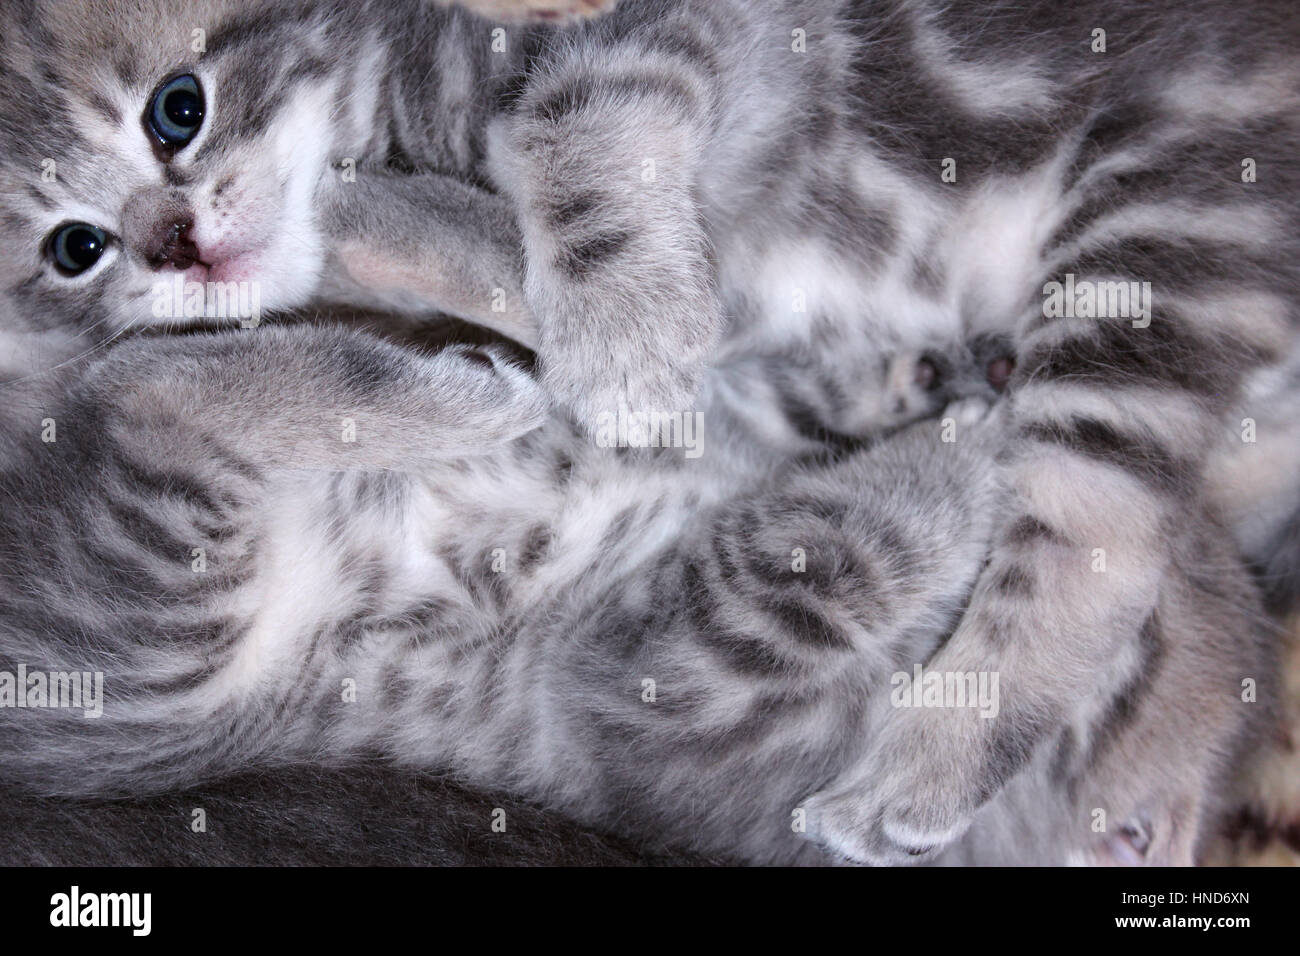 Scottish straight breed kittens play about with each other Stock Photo